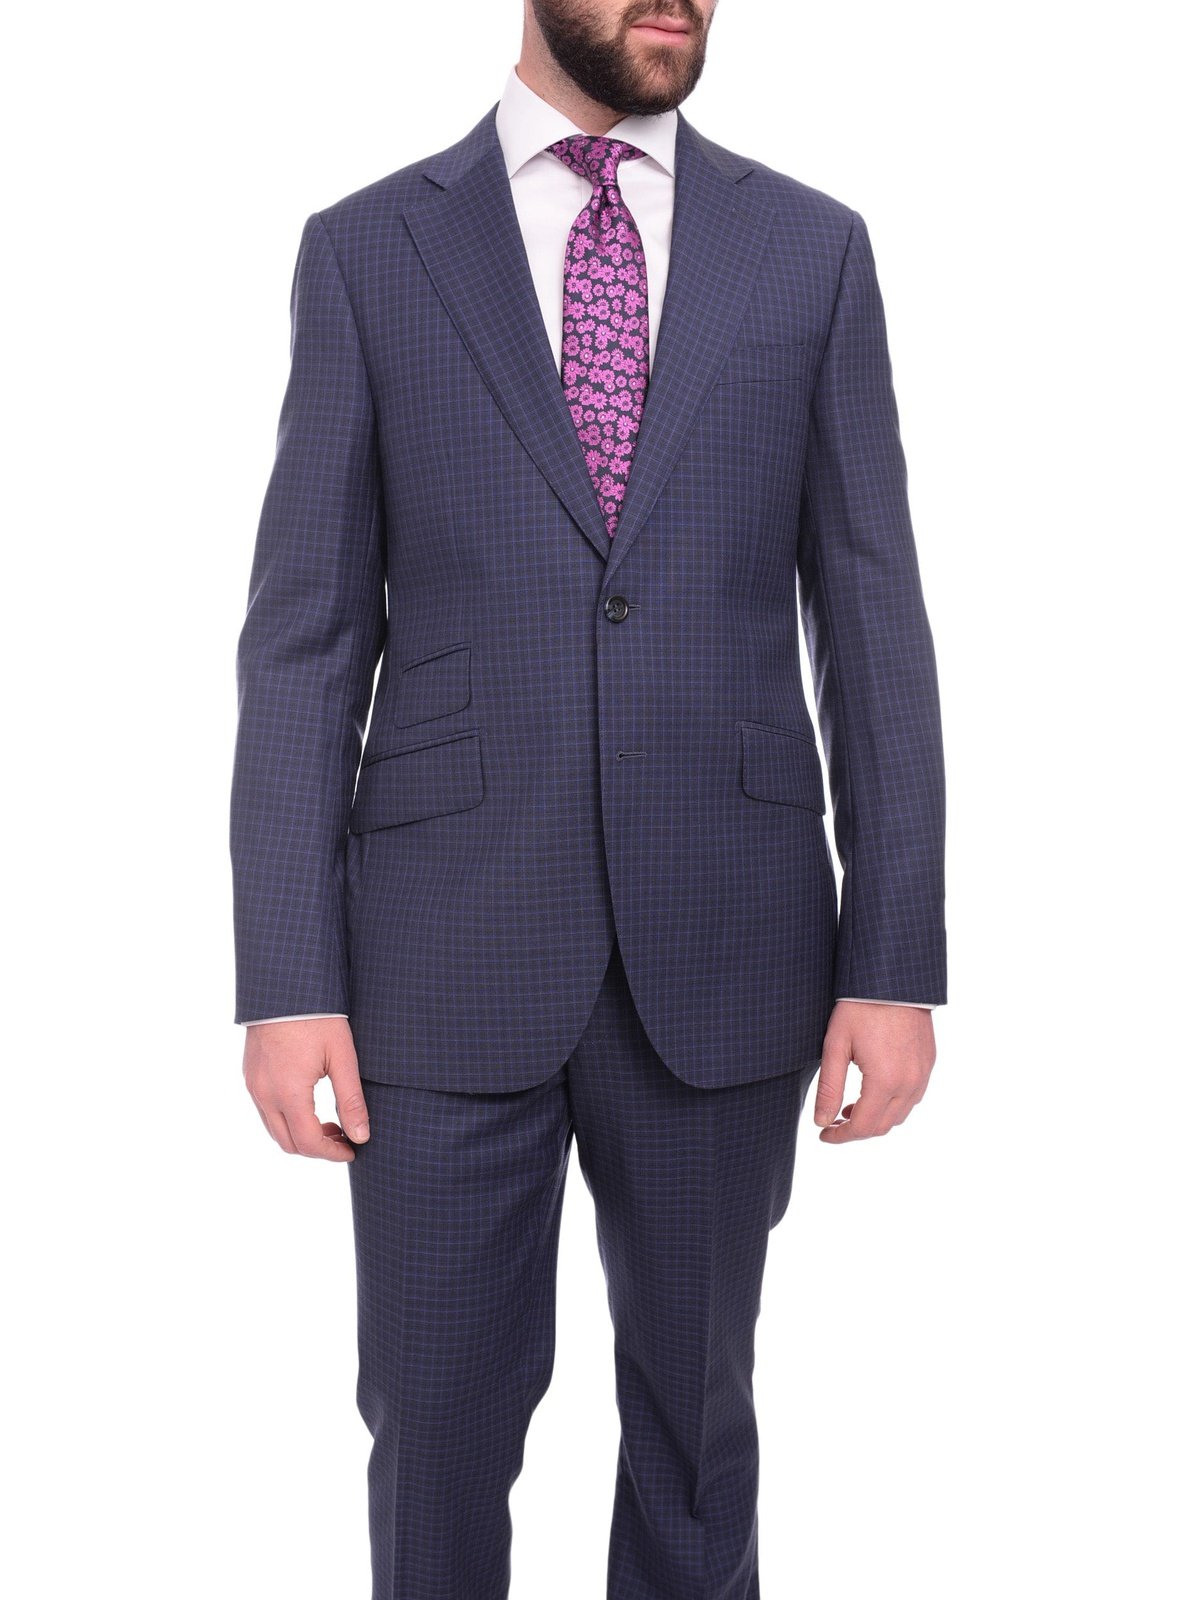 Napoli TWO PIECE SUITS Napoli Slim Fit Navy Blue Check Two Button Half Canvassed Super 150s Wool Suit